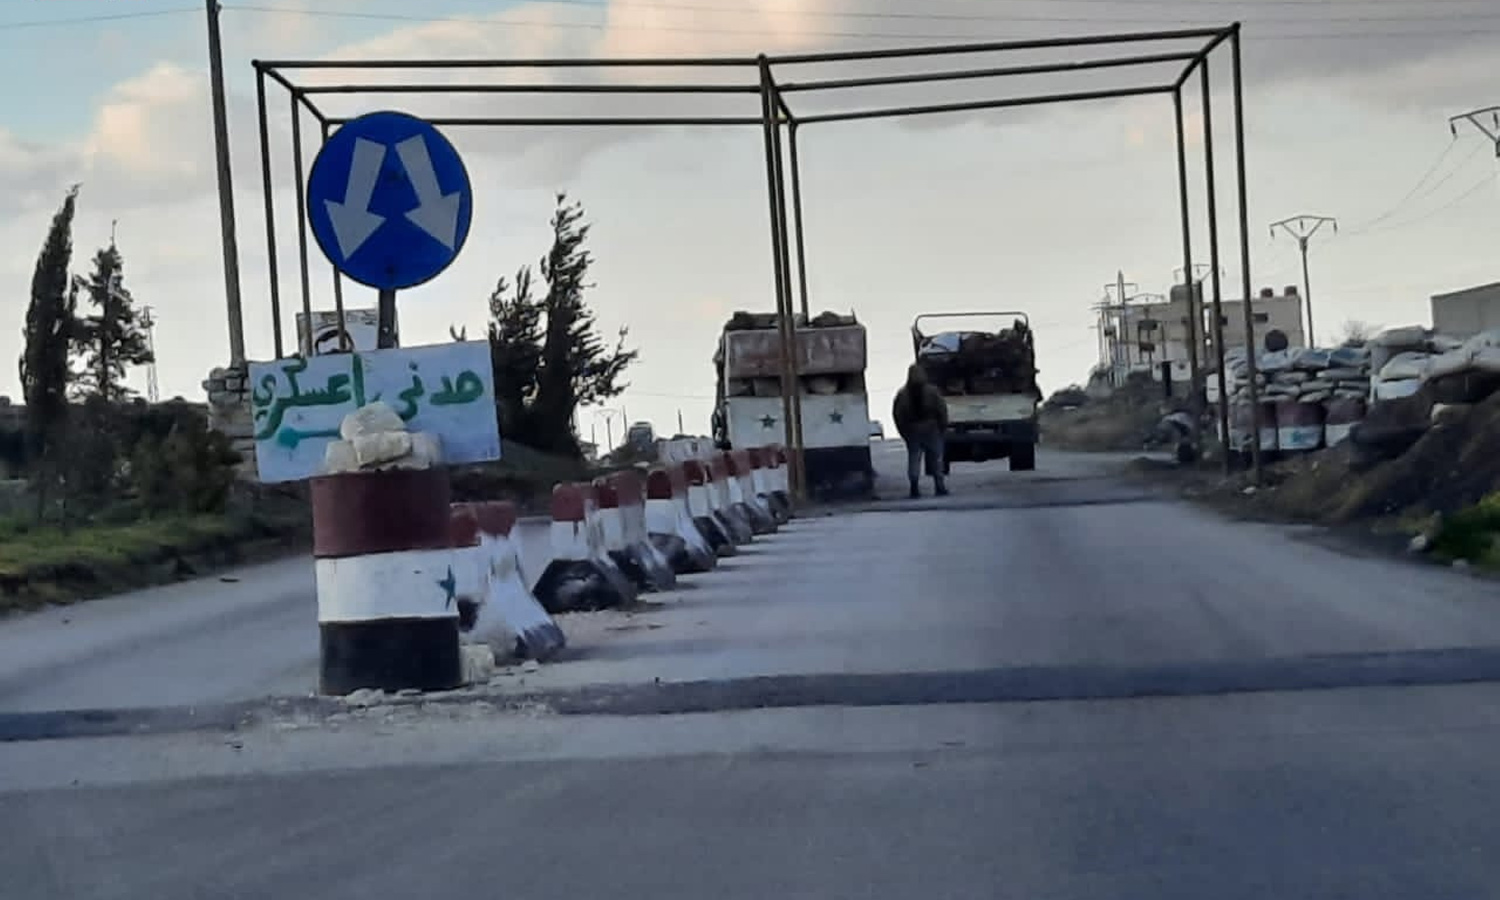 A security checkpoint for regime forces at the entrance to the town of Shahba, northwest of As-Suwayda - 16 March 2022 (Suwayda24 / Facebook)